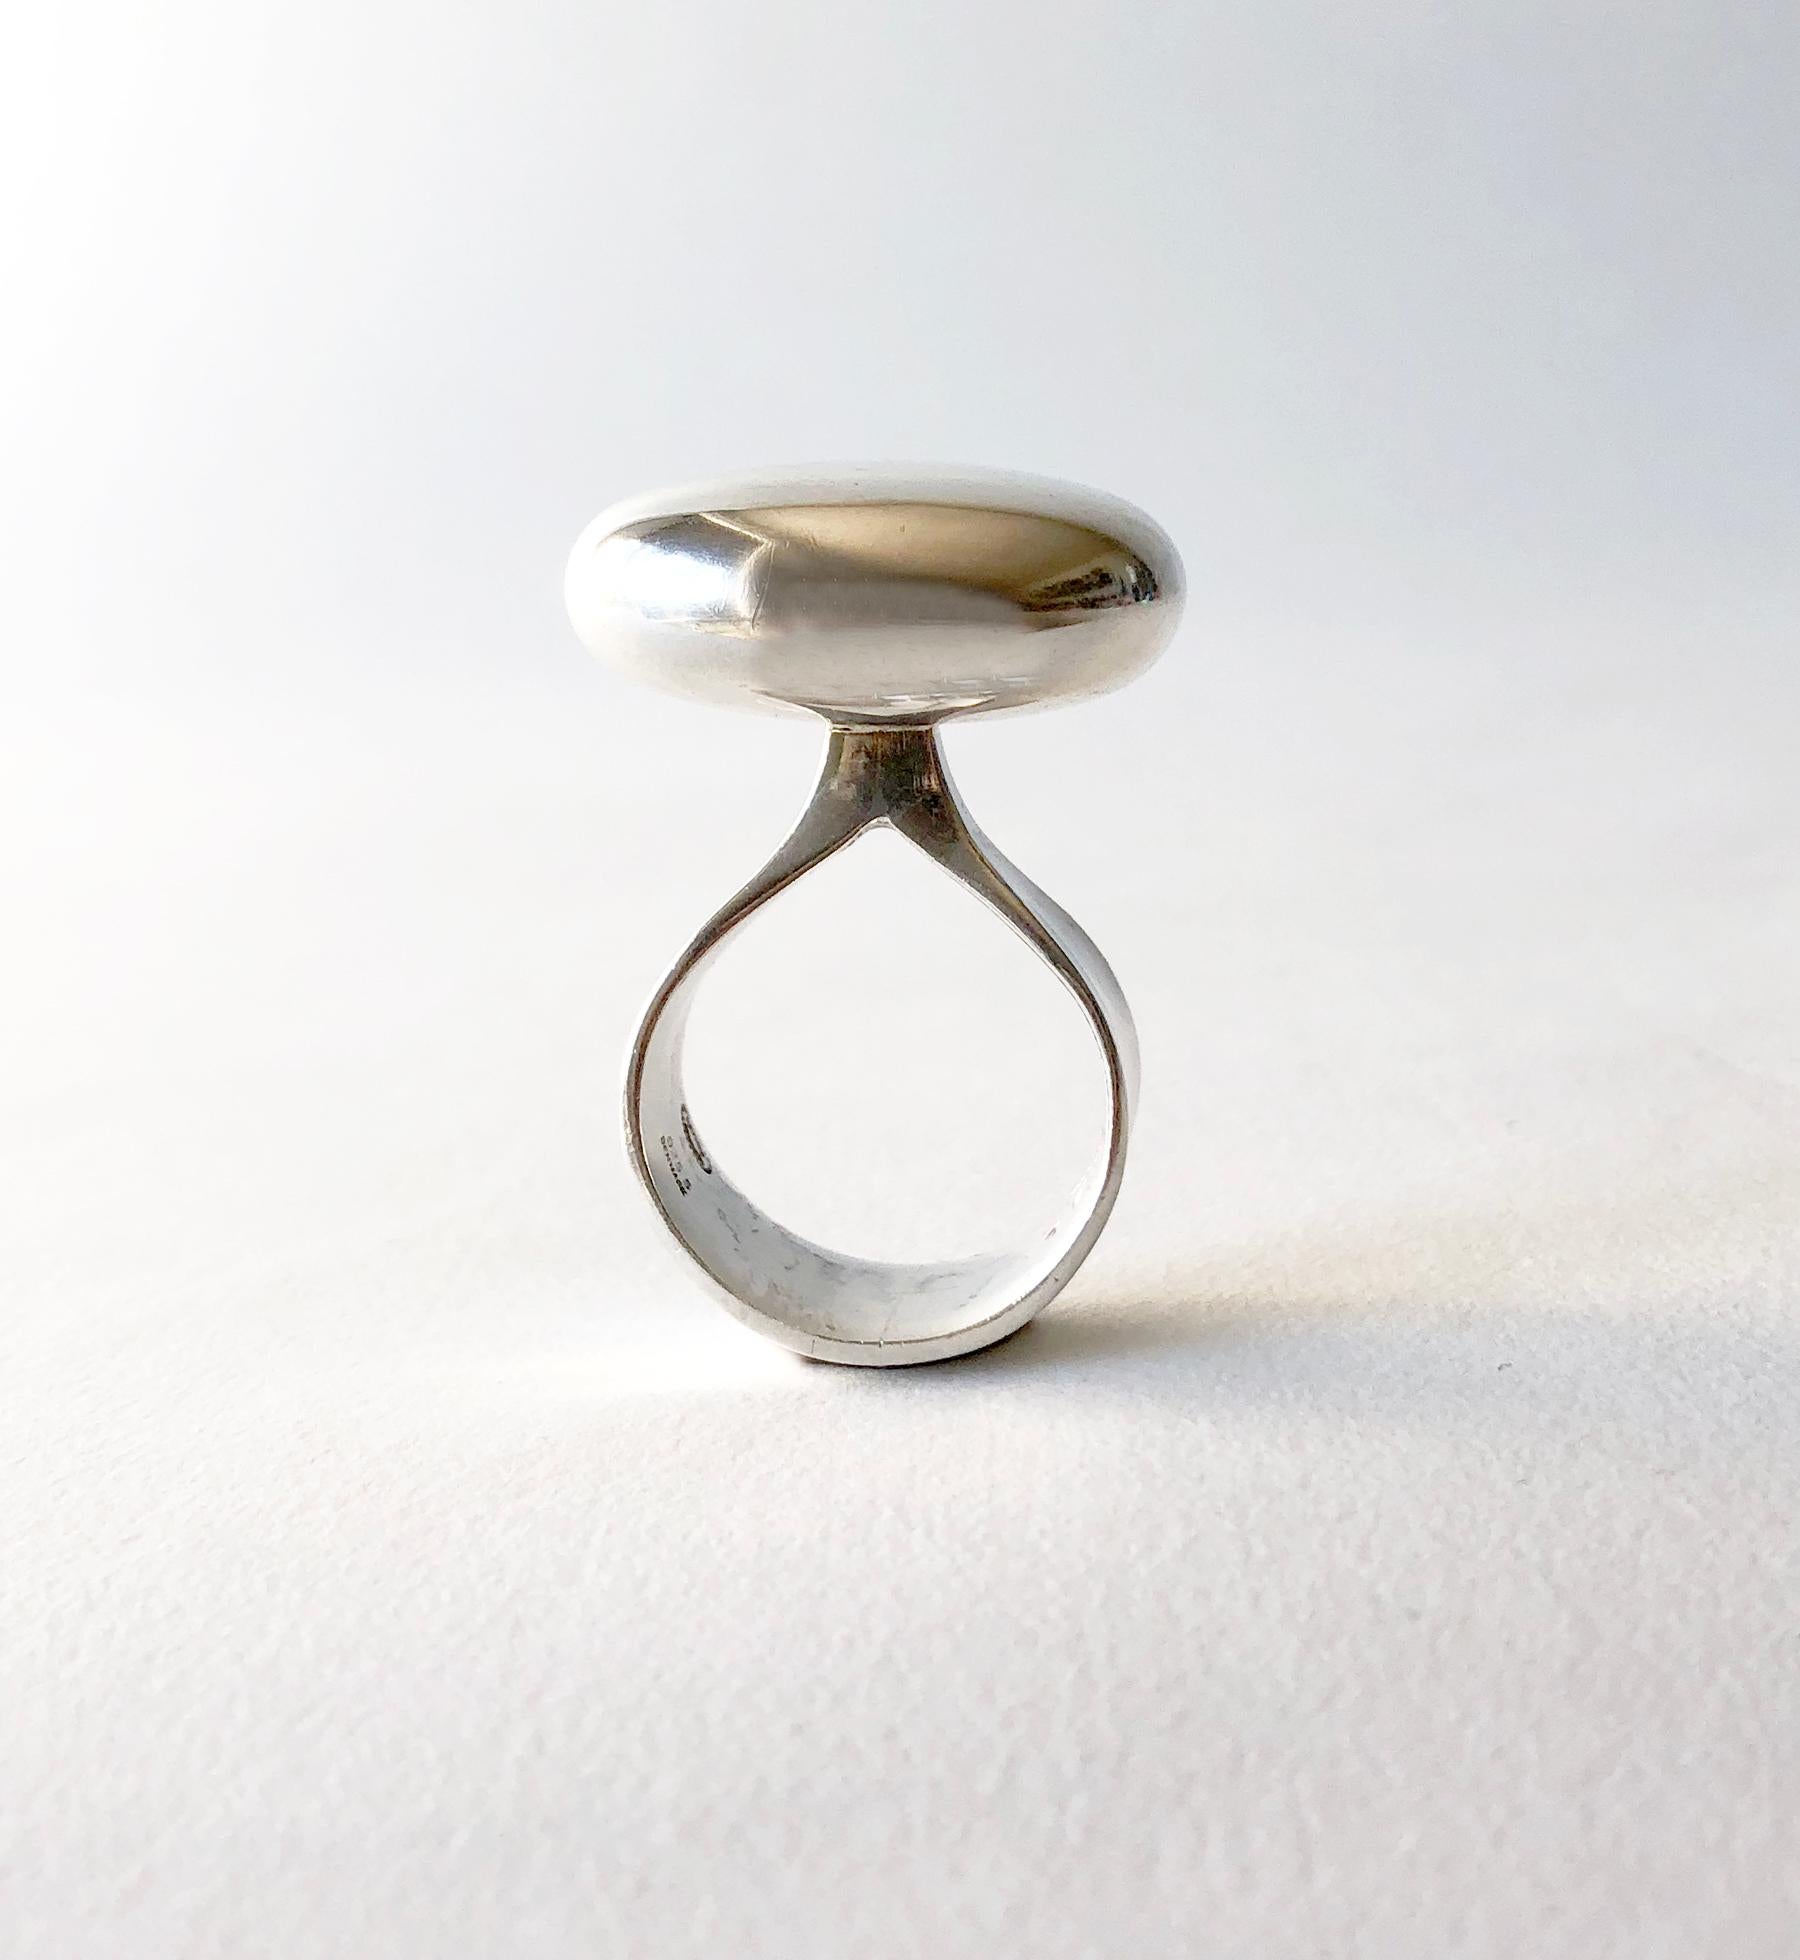 Mirror polish sterling silver ring designed by Vivianna Torun Bulow-Hube for Georg Jensen, circa 1970's.  Ring is a finger size 8 and is signed with the Jensen dotted hallmark, Torun, Denmark, 155.  In excellent vintage condition.